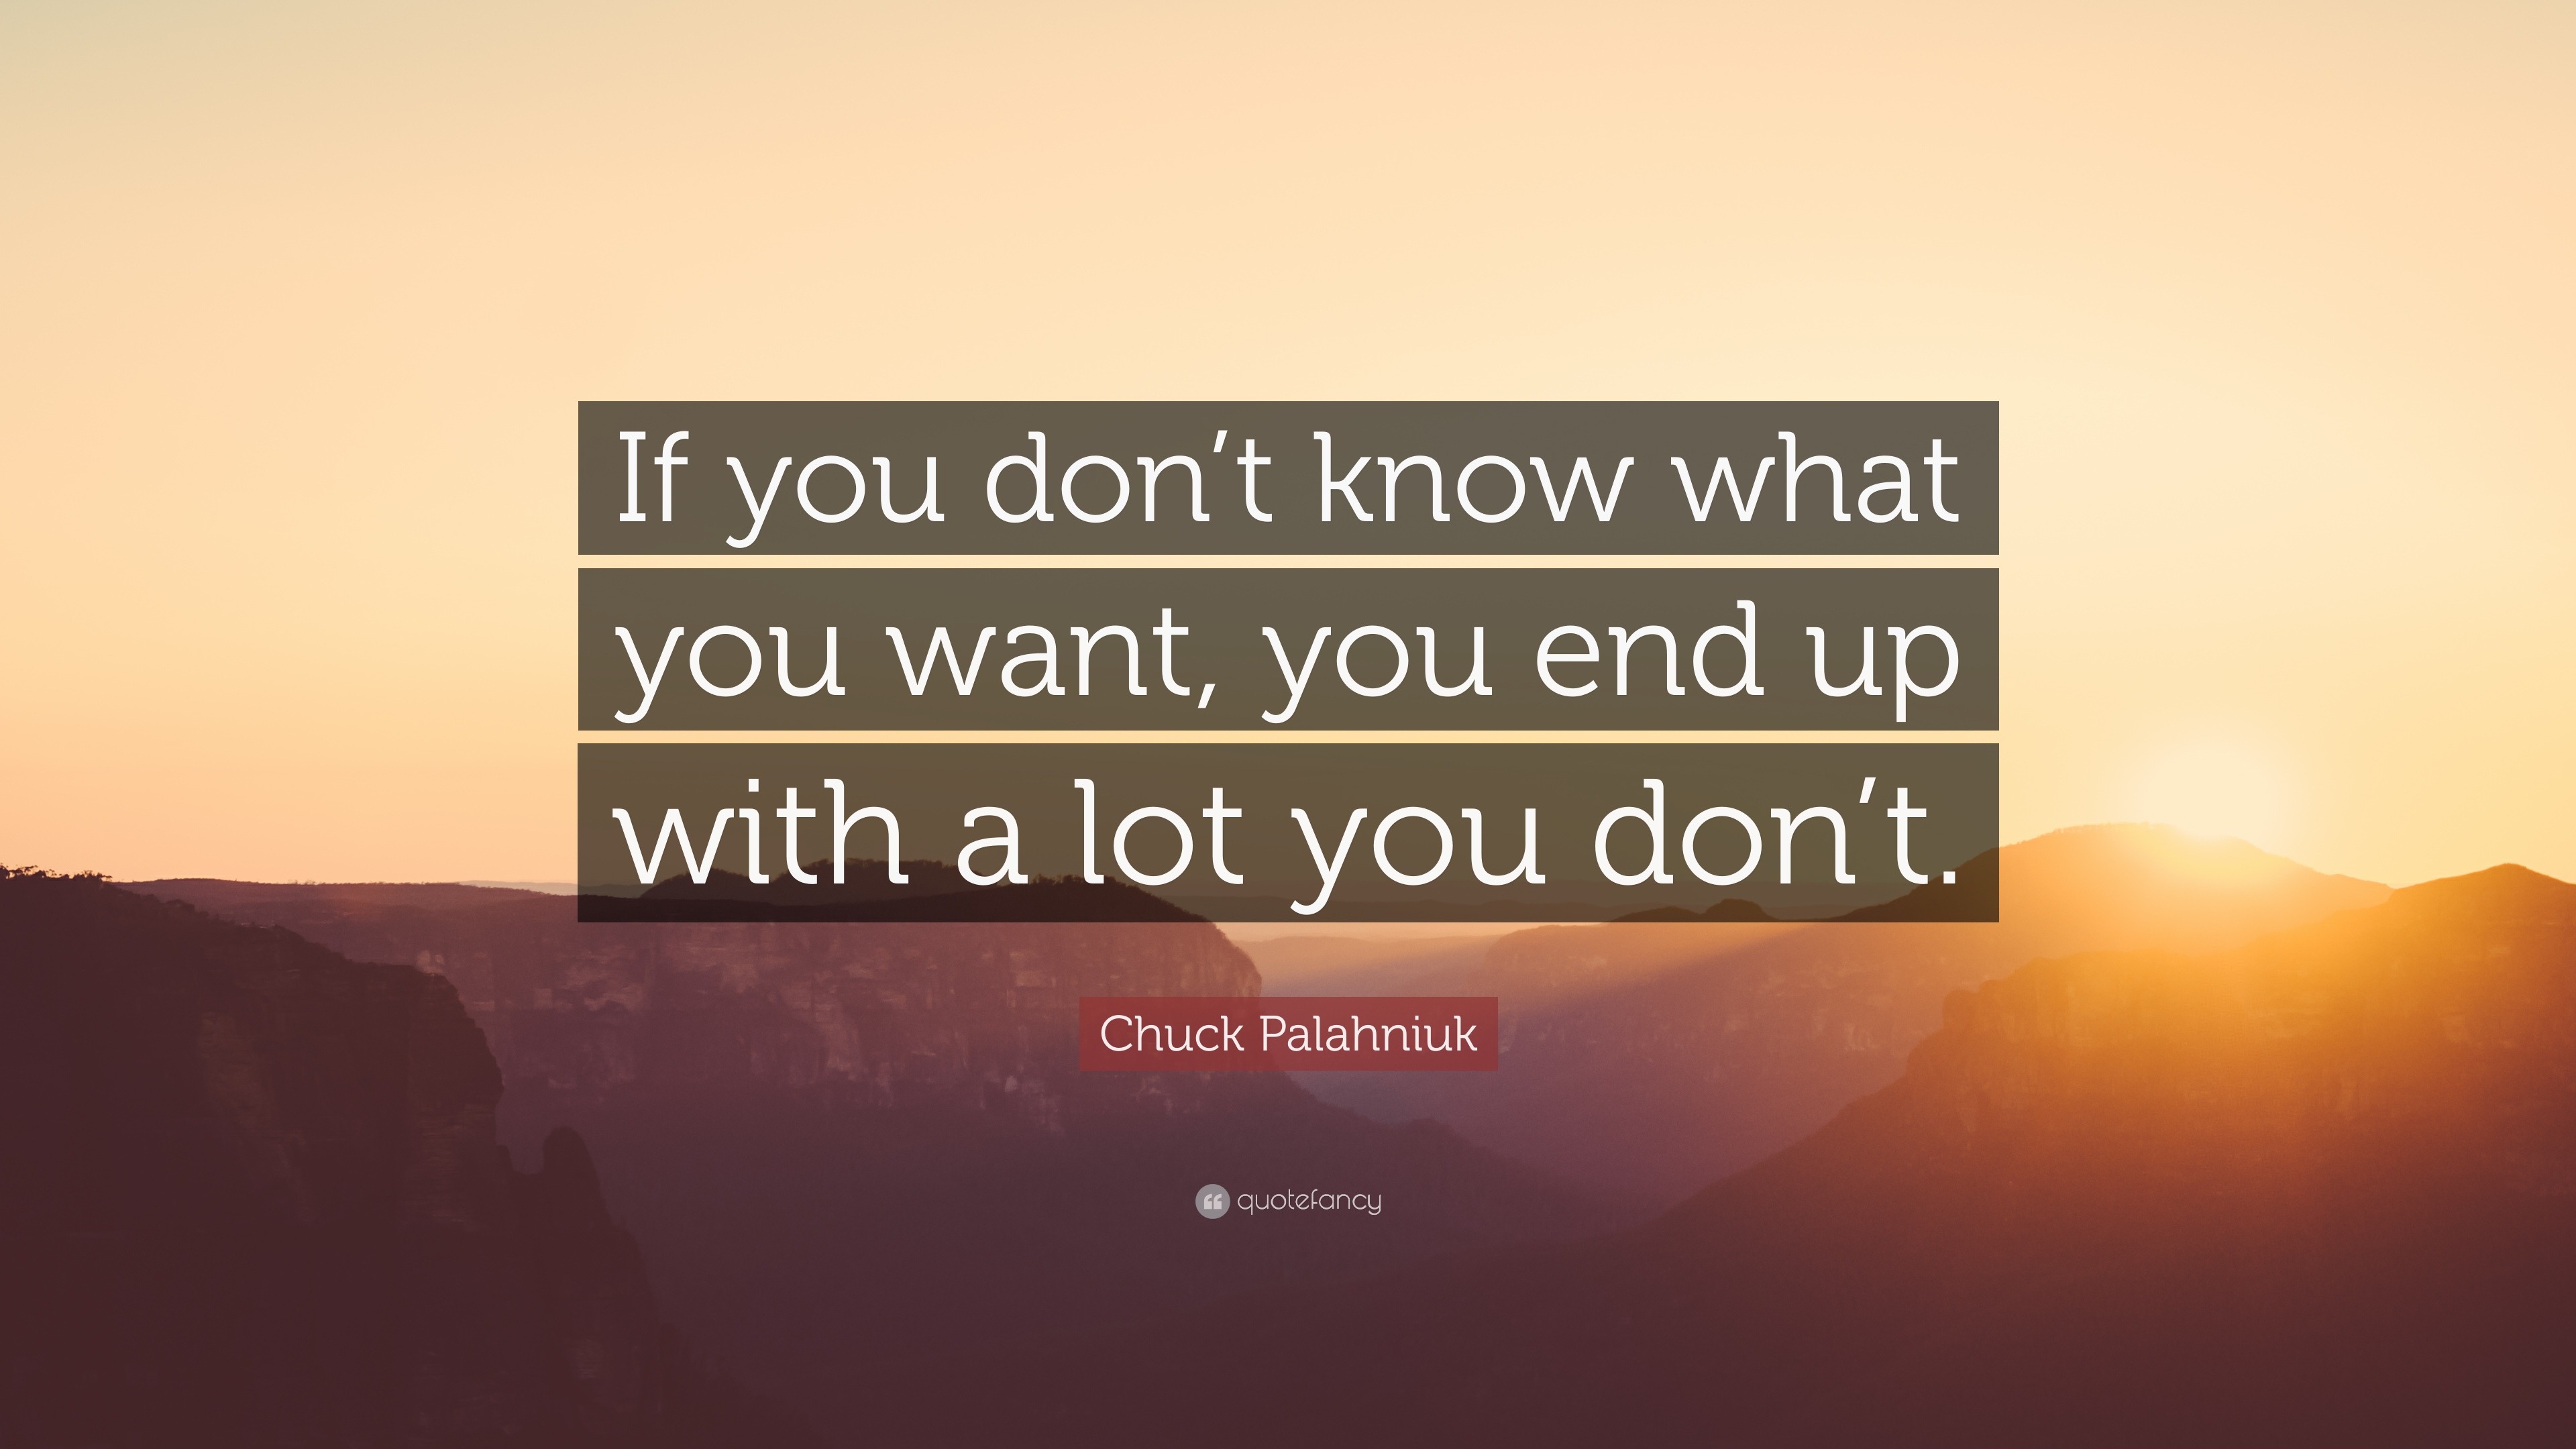 Chuck Palahniuk Quote: “If You Don't Know What You Want, You End Up With A